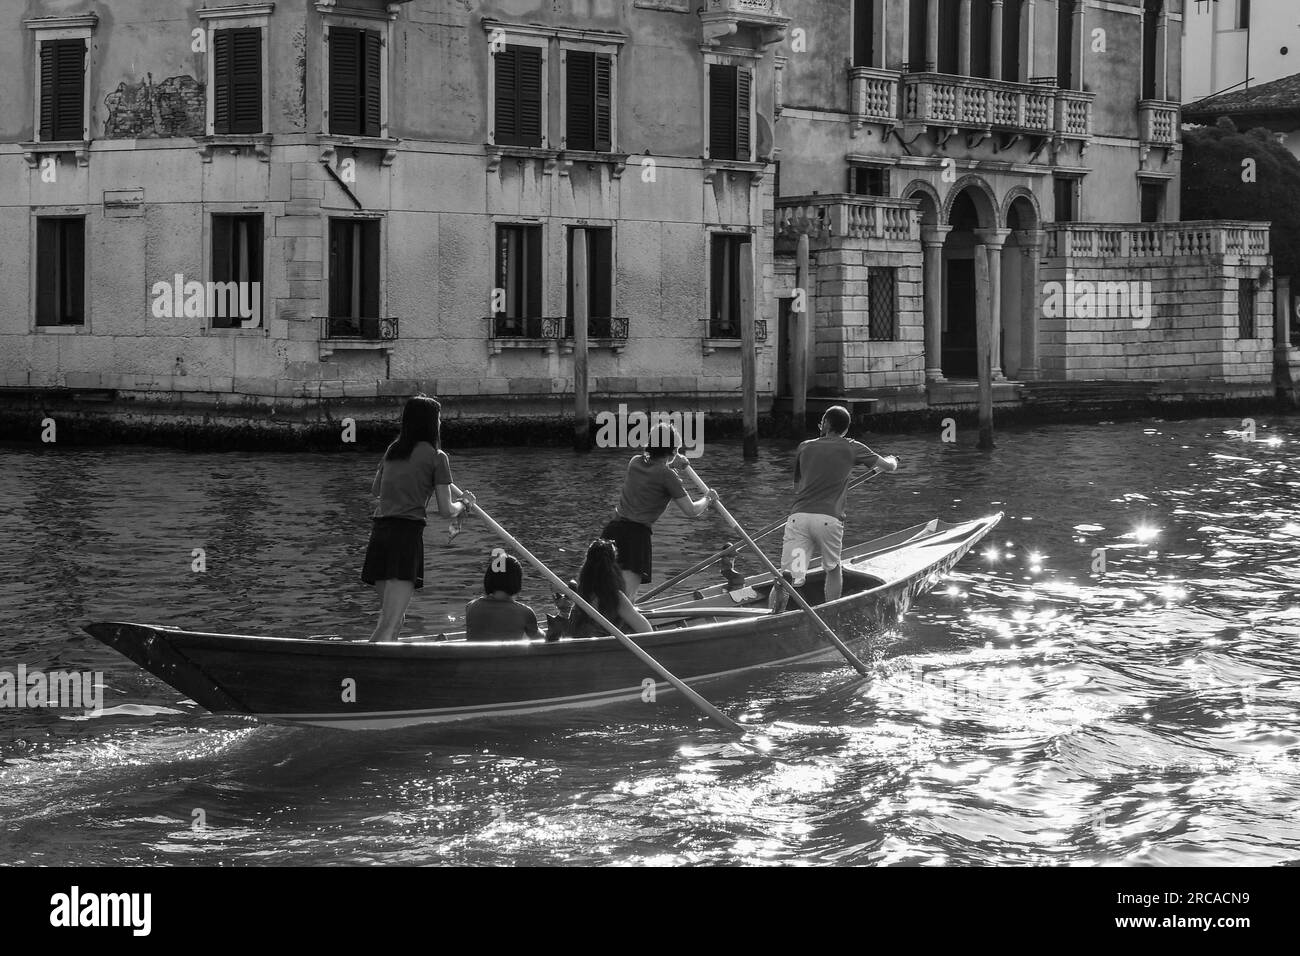 Black & White - group of people standing rowing in Venetian row style on the Grand Canal at sunset, sestiere of Dorsoduro, Venice, Veneto, Italy Stock Photo